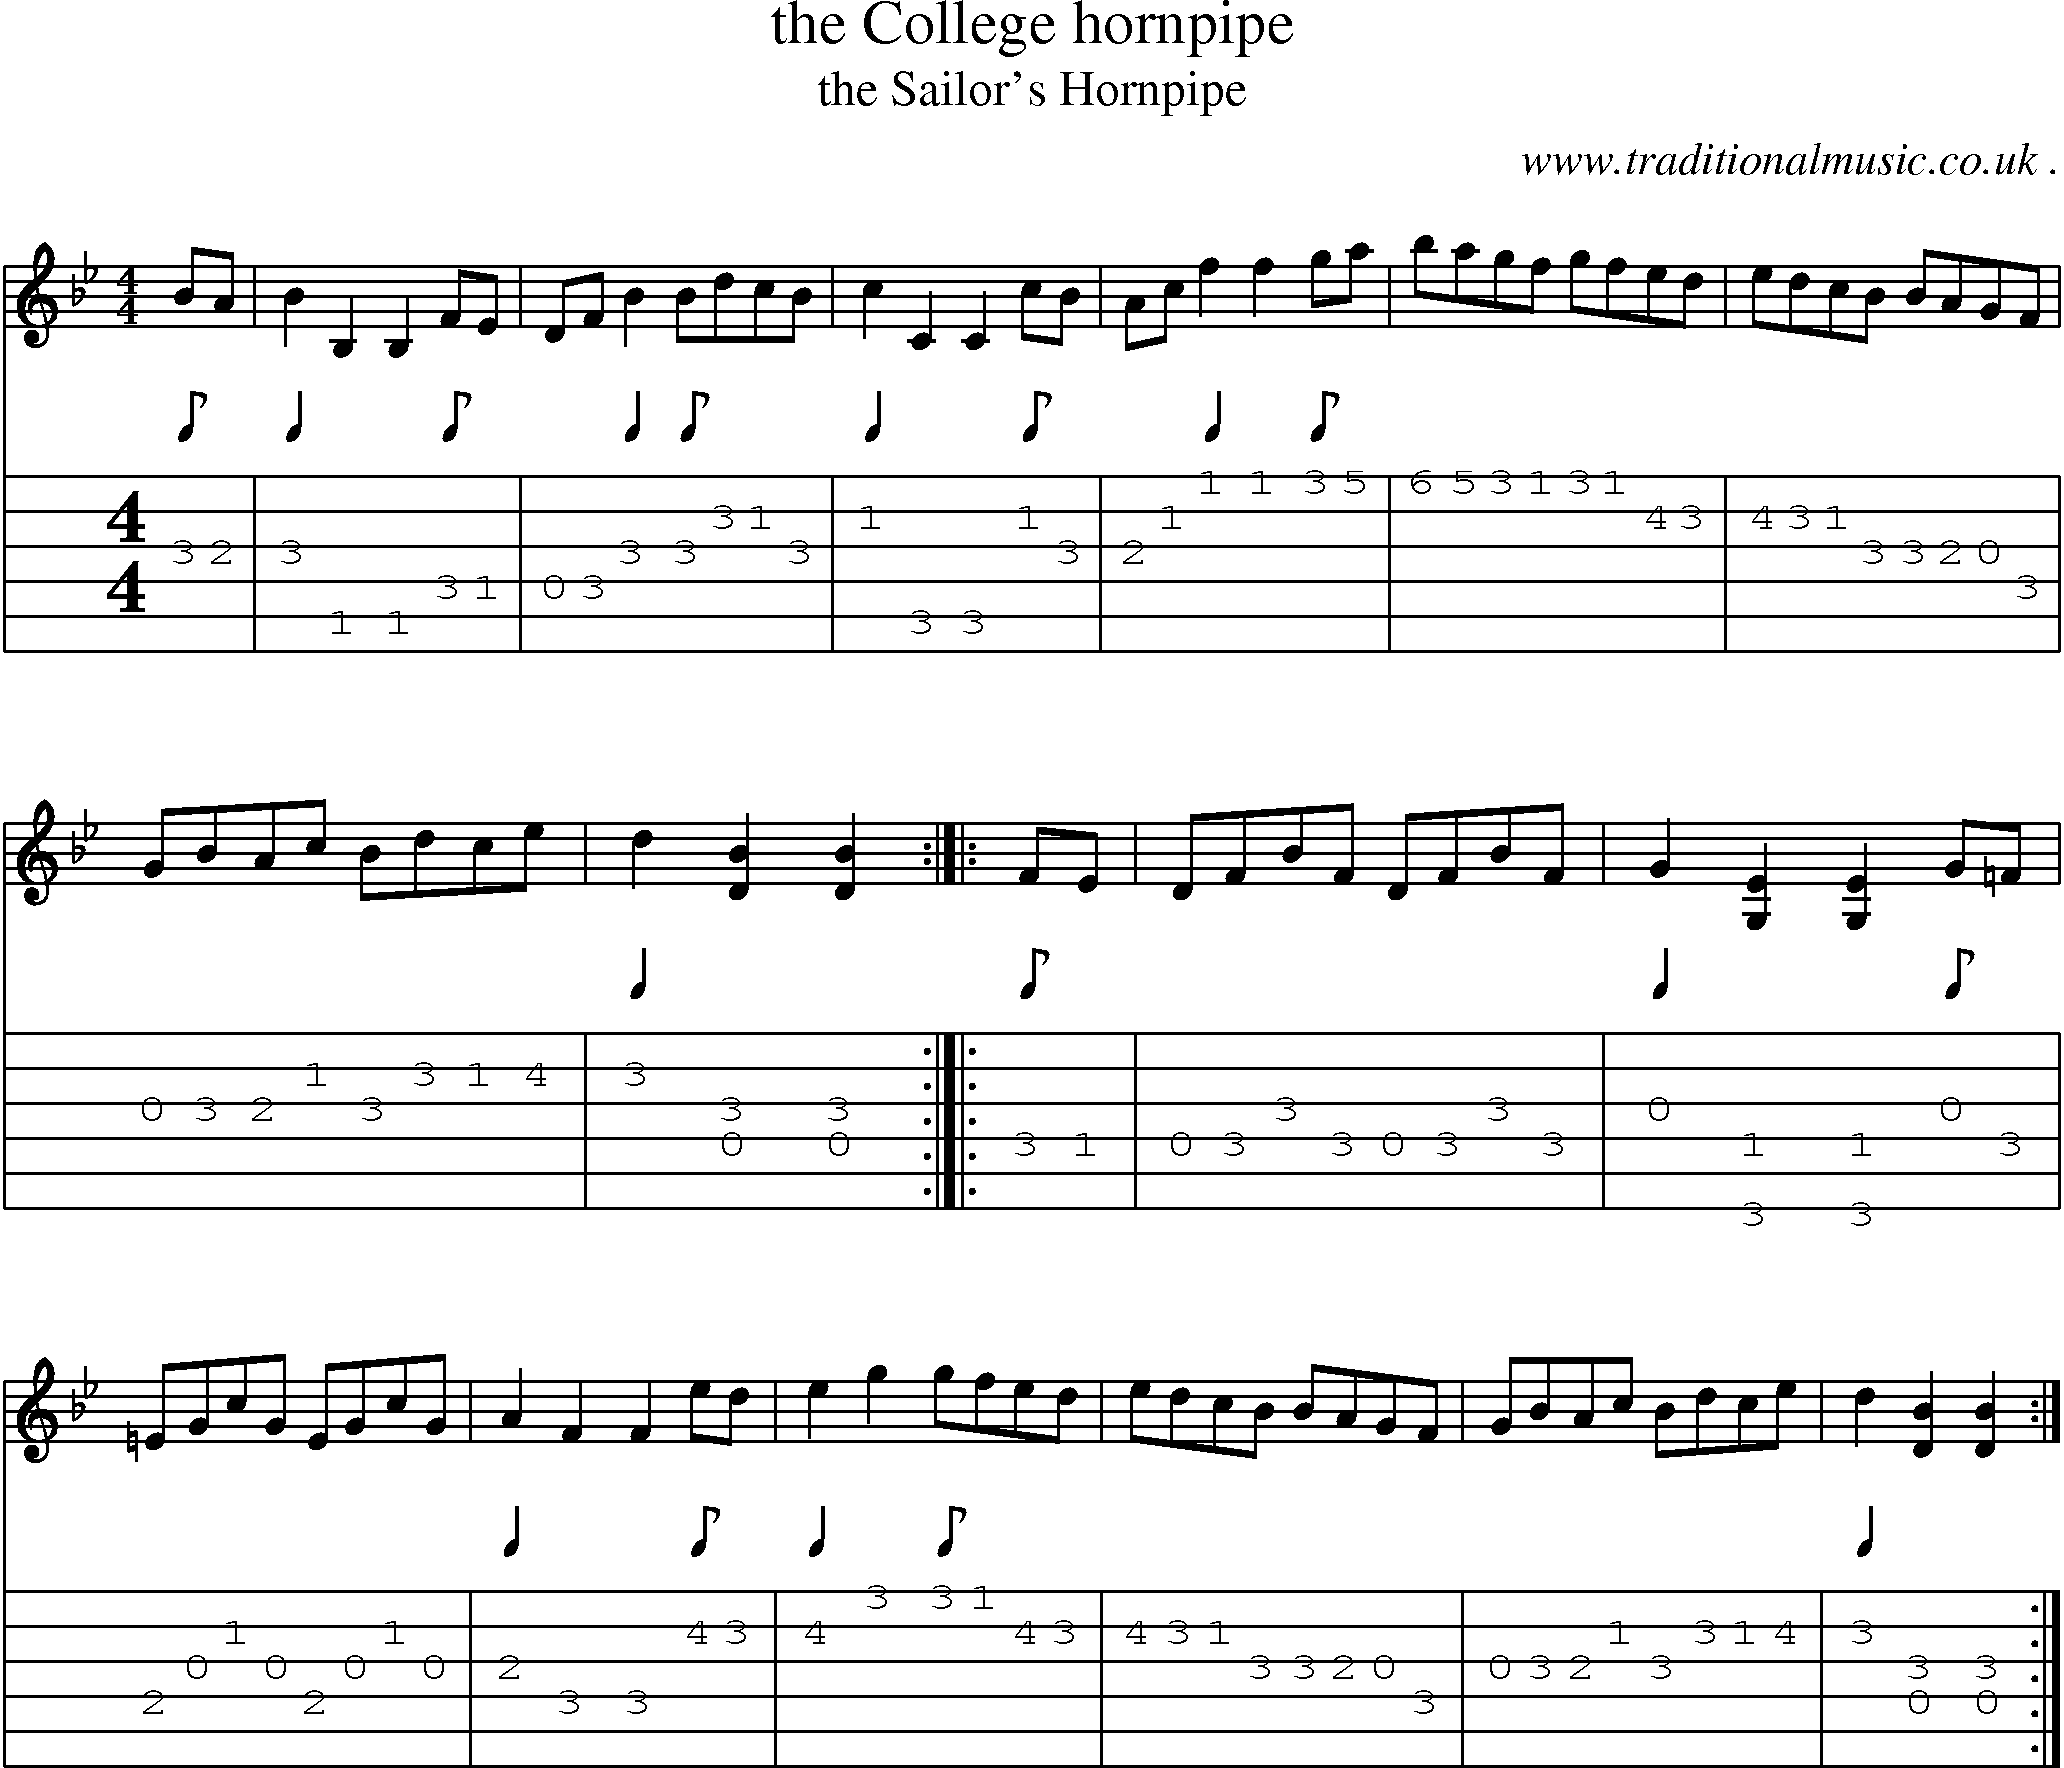 Sheet-Music and Guitar Tabs for The College Hornpipe